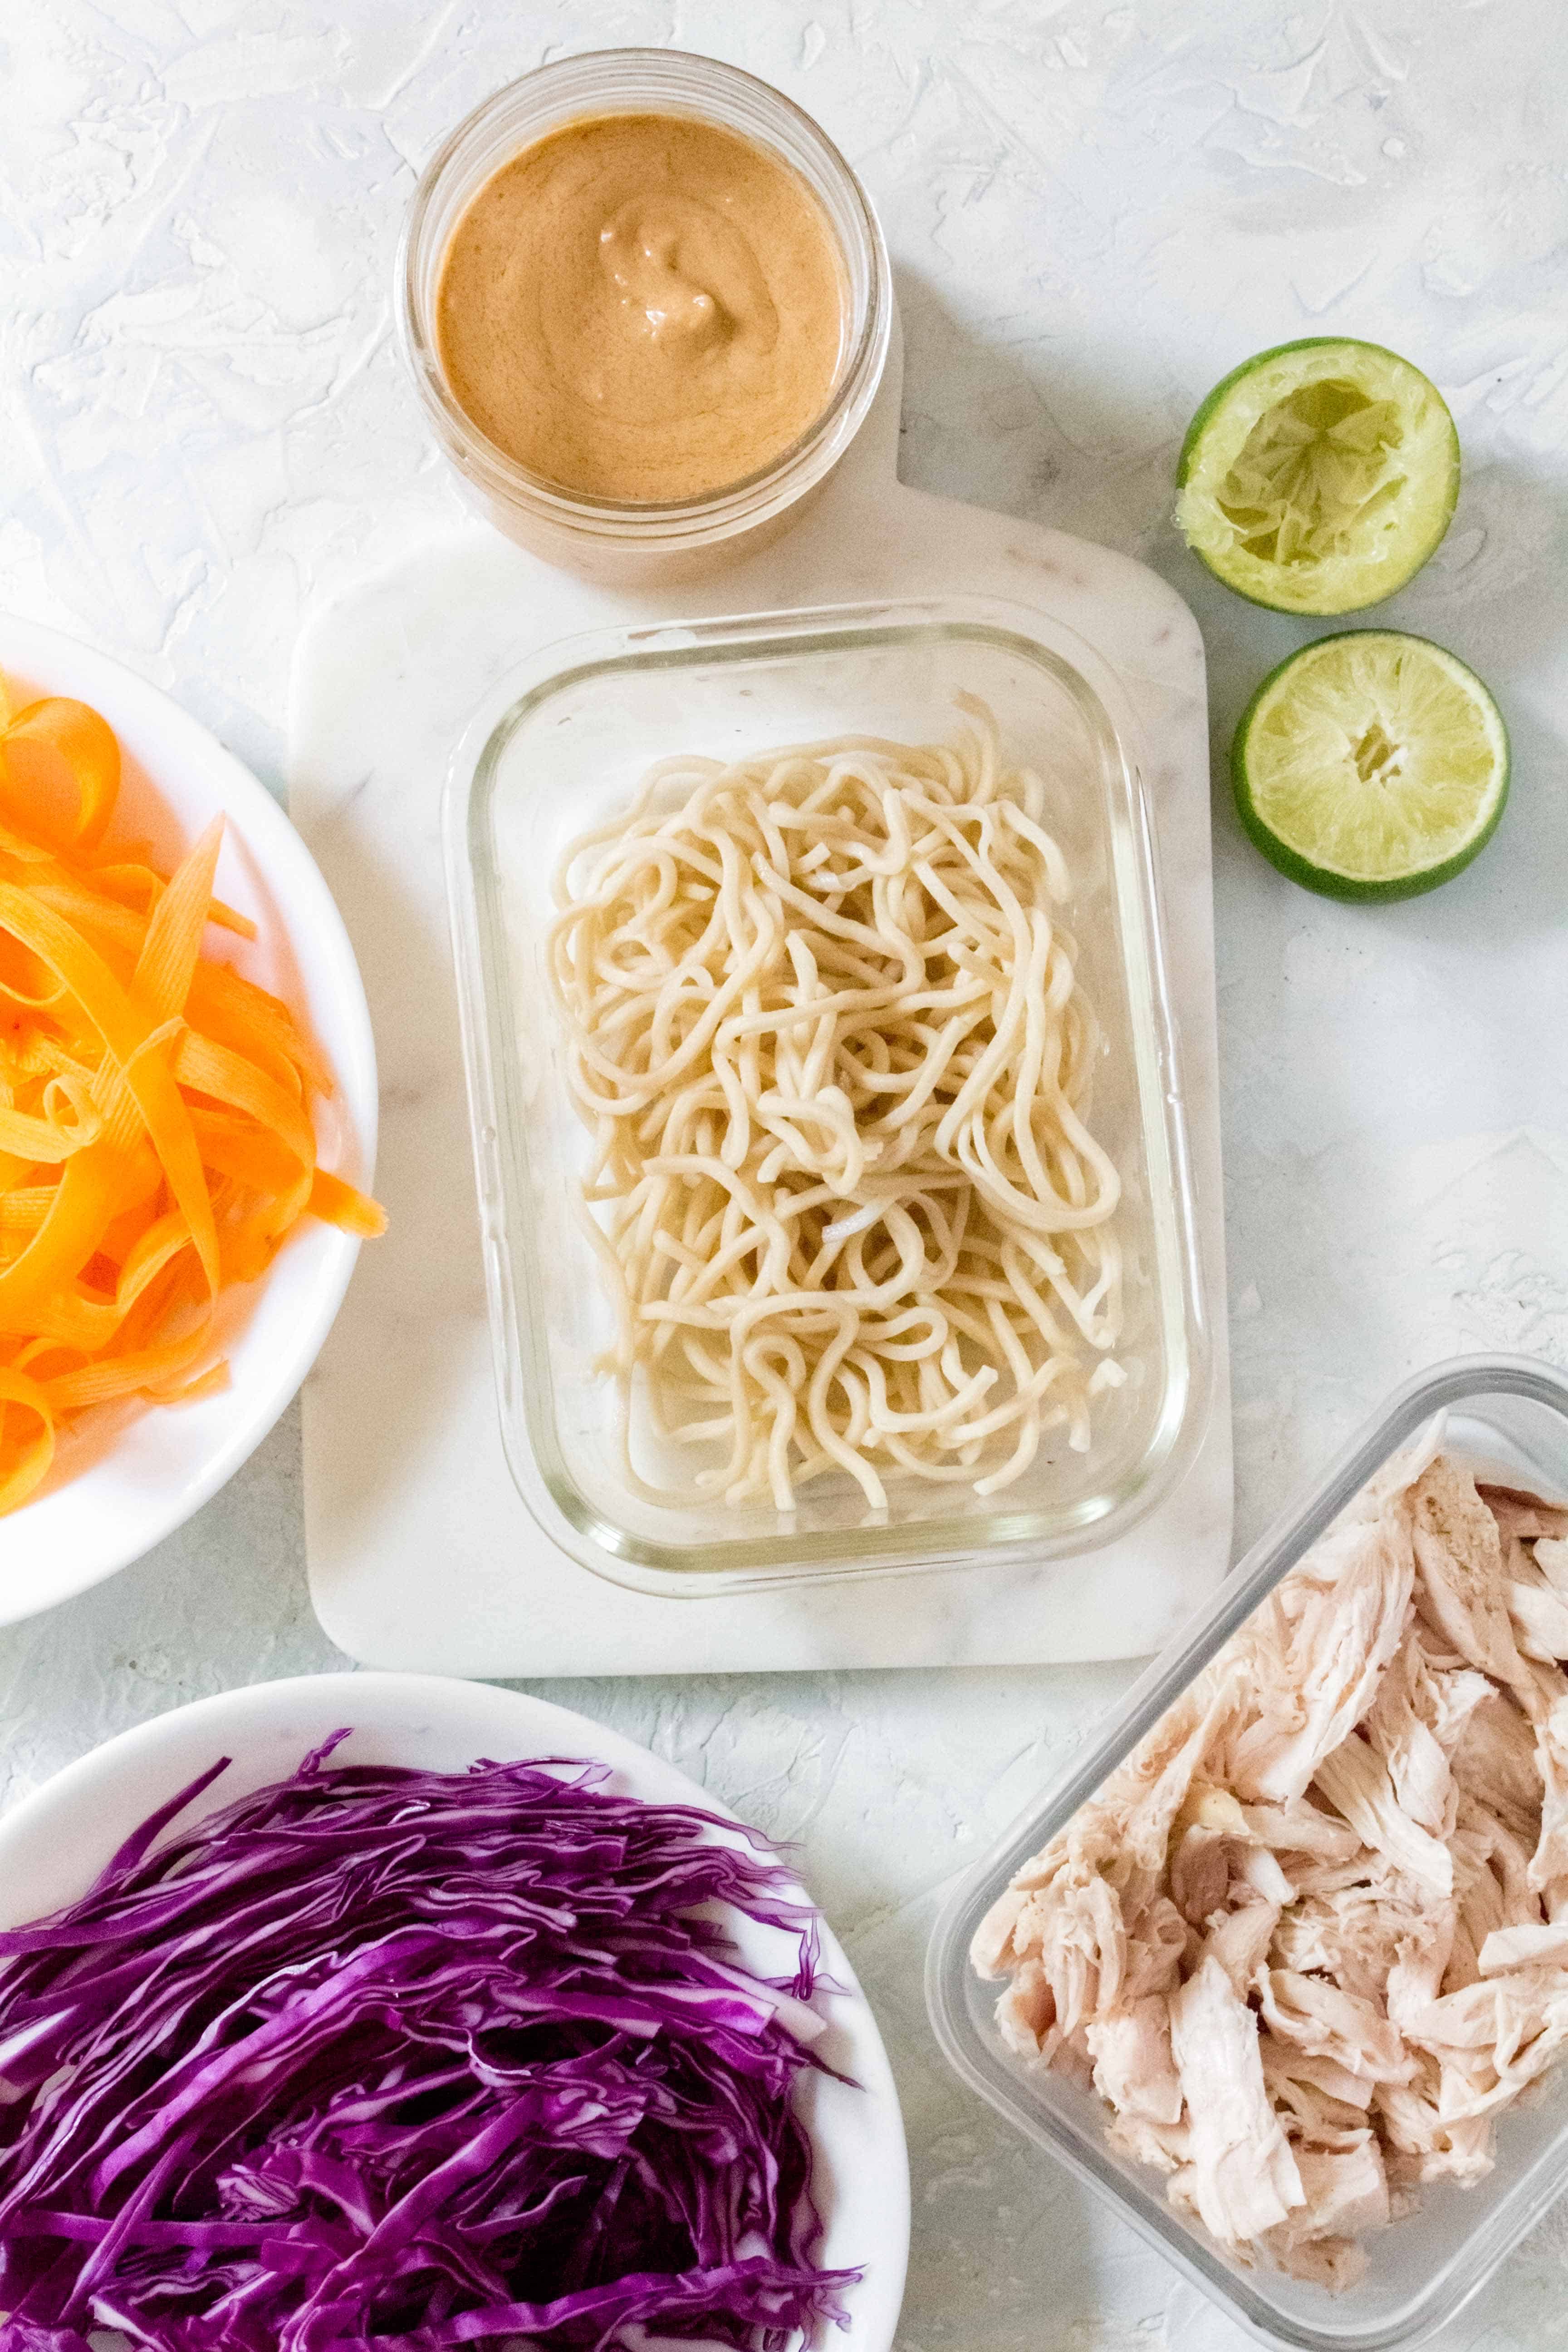 This Cold Chicken Peanut Lime NoodlesÂ is so easy to make, customizable, and is a great way to use up leftovers!